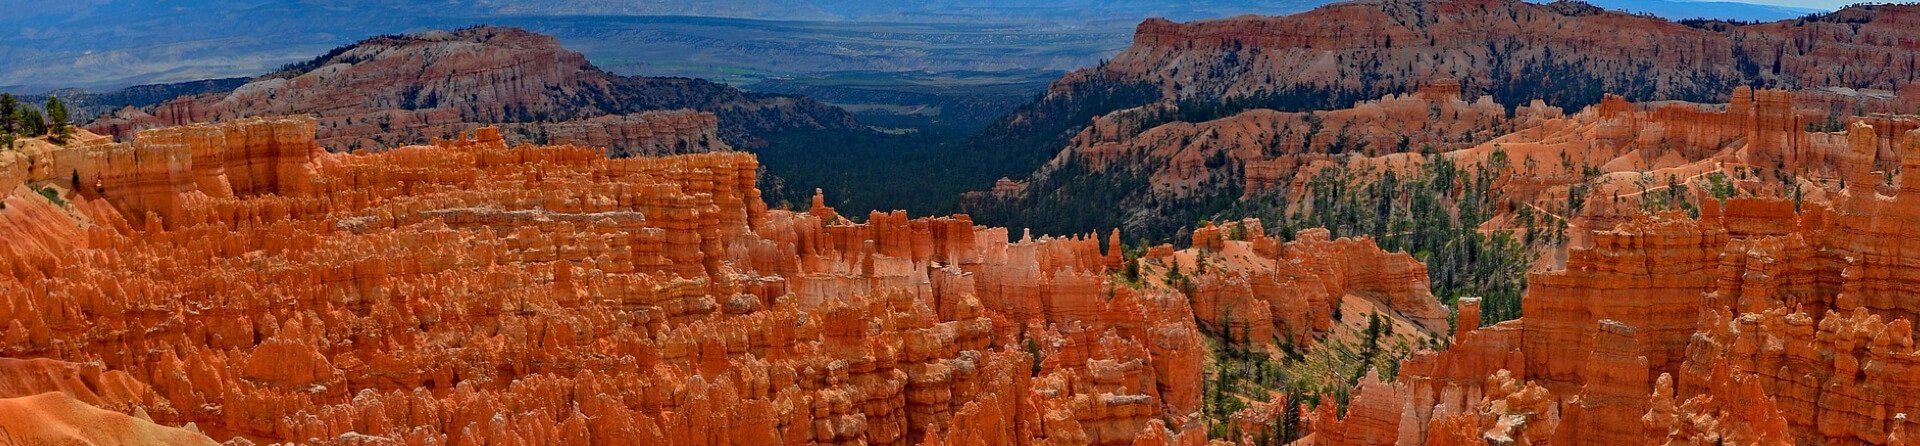 bryce canyon esprit nomade voyages